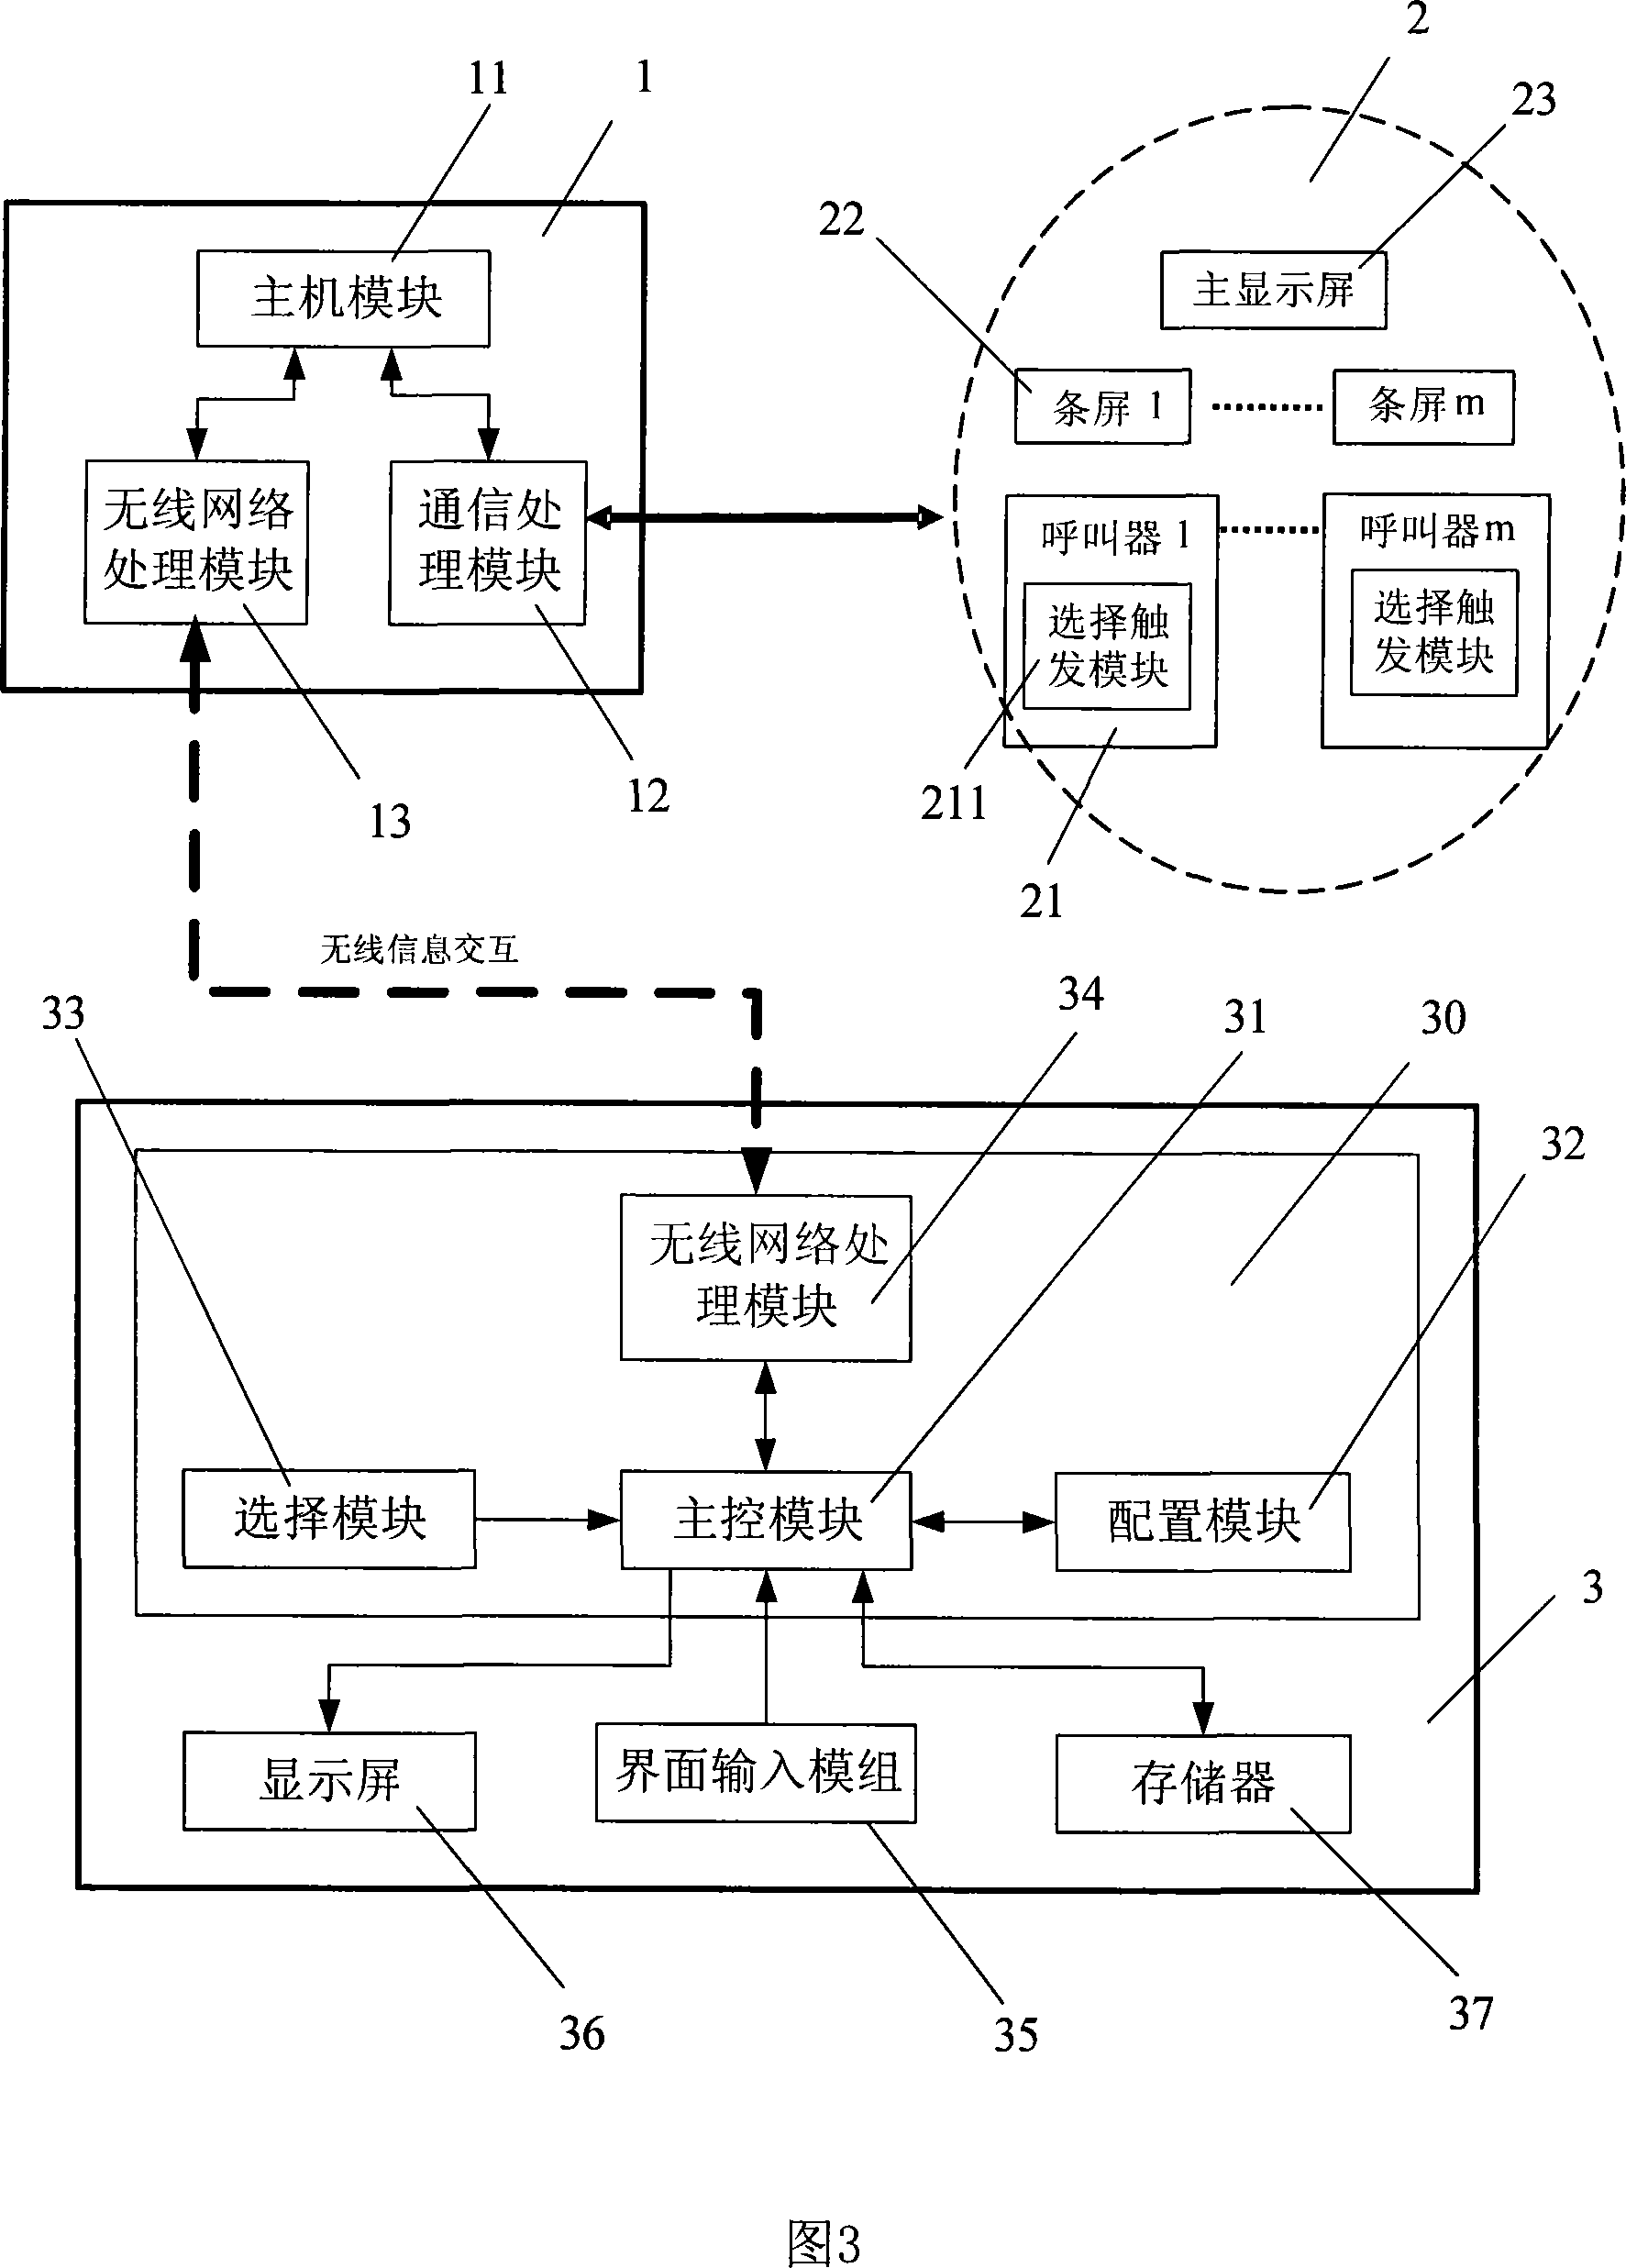 Flexible intelligent queuing management method and system